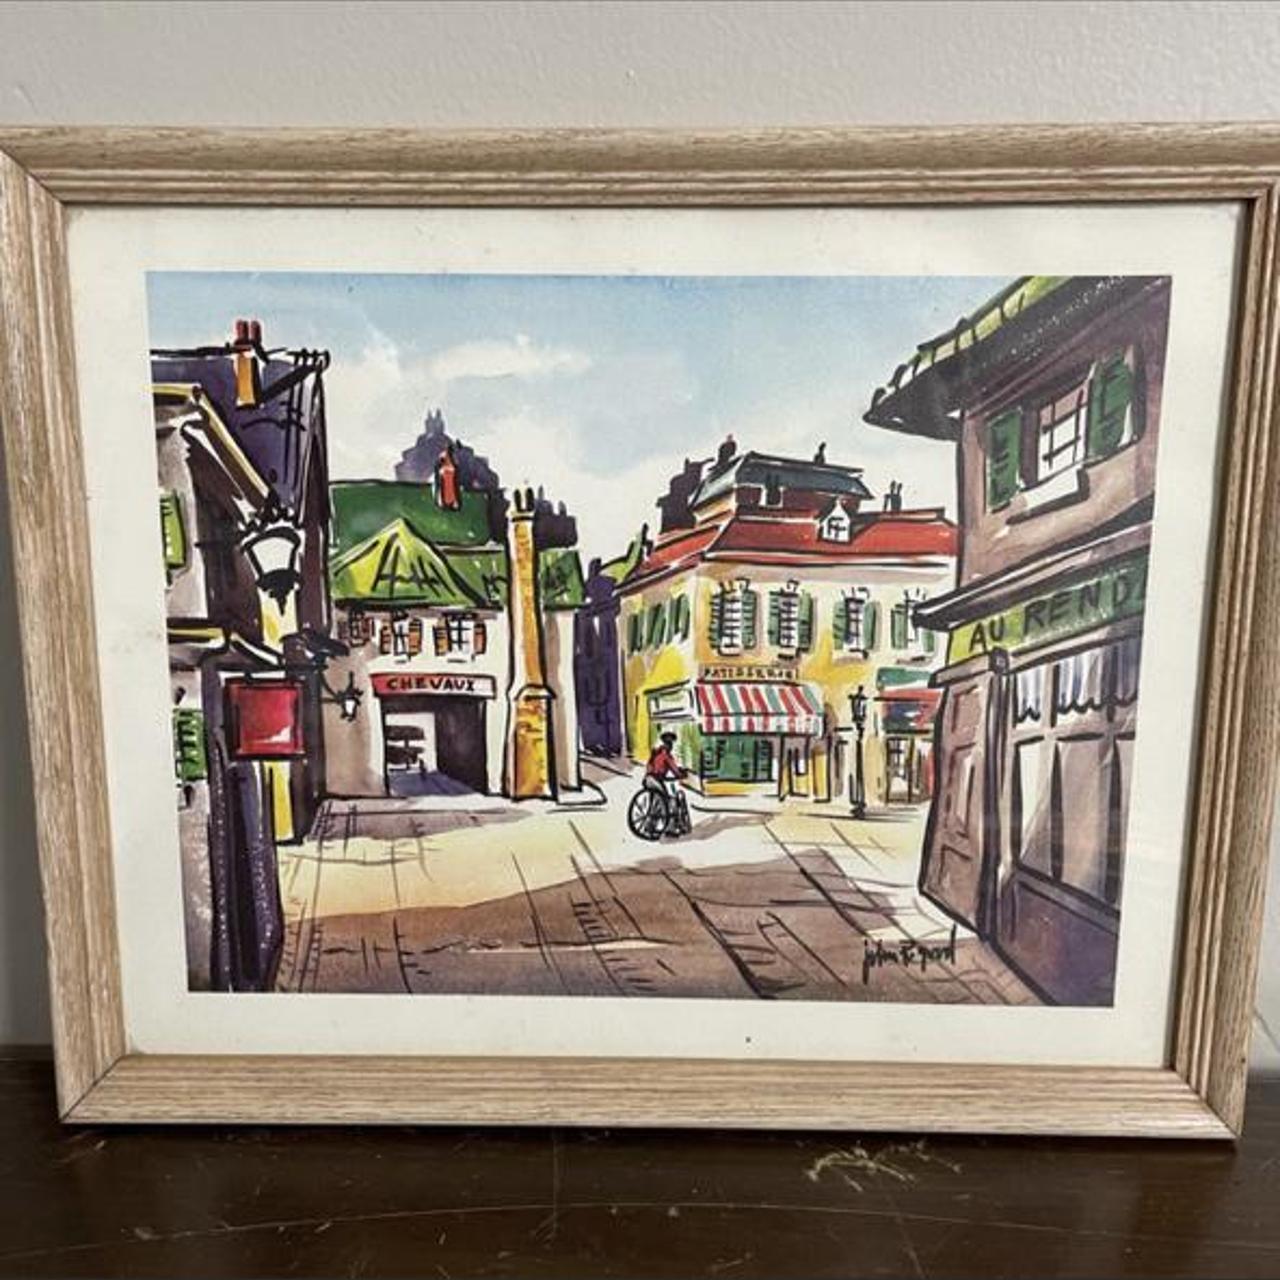 Product Image 2 - ▪️Vintage French Street Watercolor Print▪️
Vintage